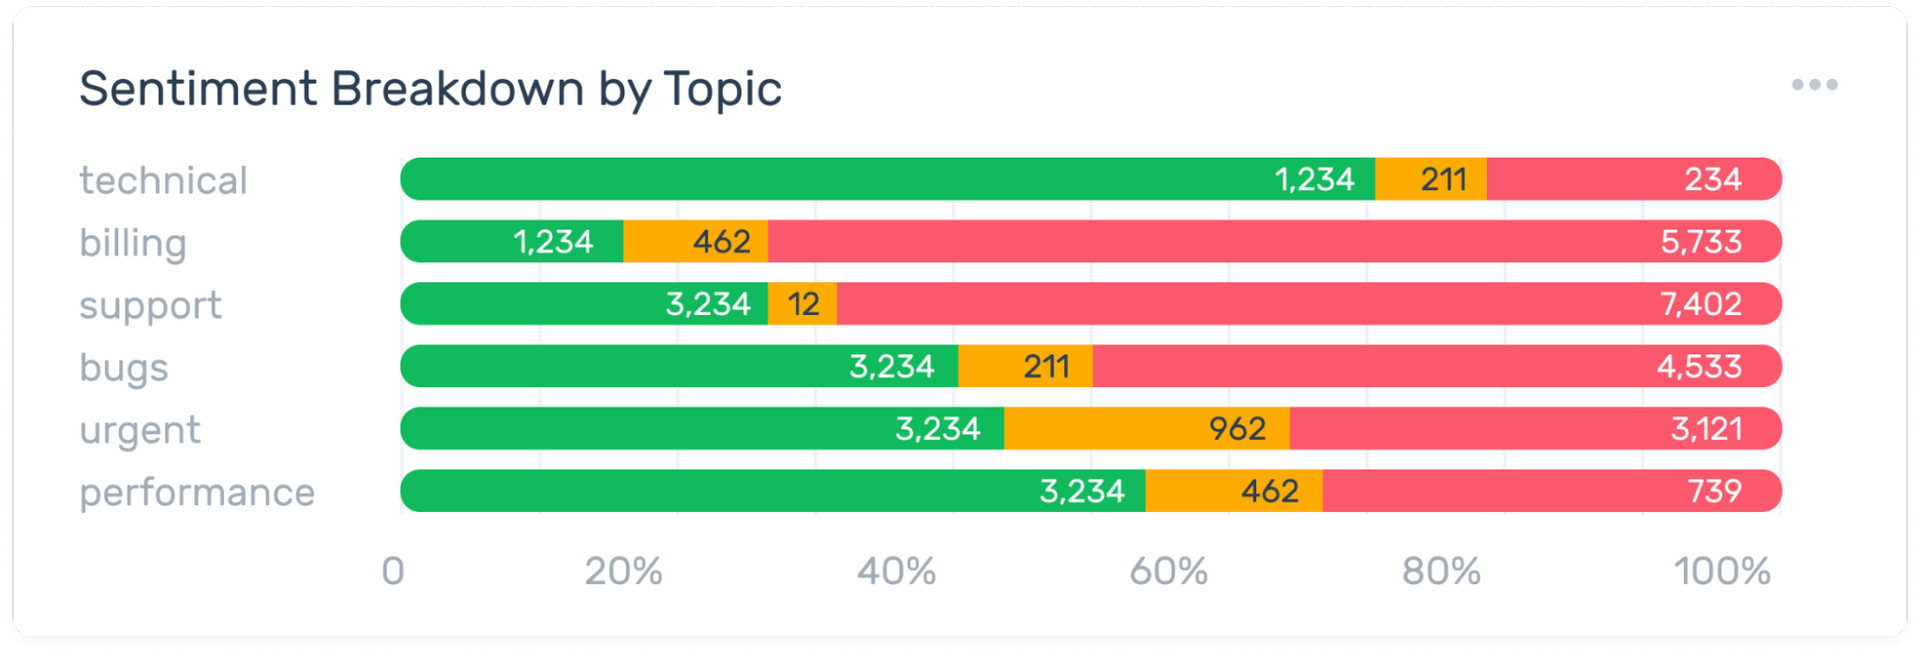 Sentiment breakdown by topic. Technical, billing, support, bugs, urgent. performance.